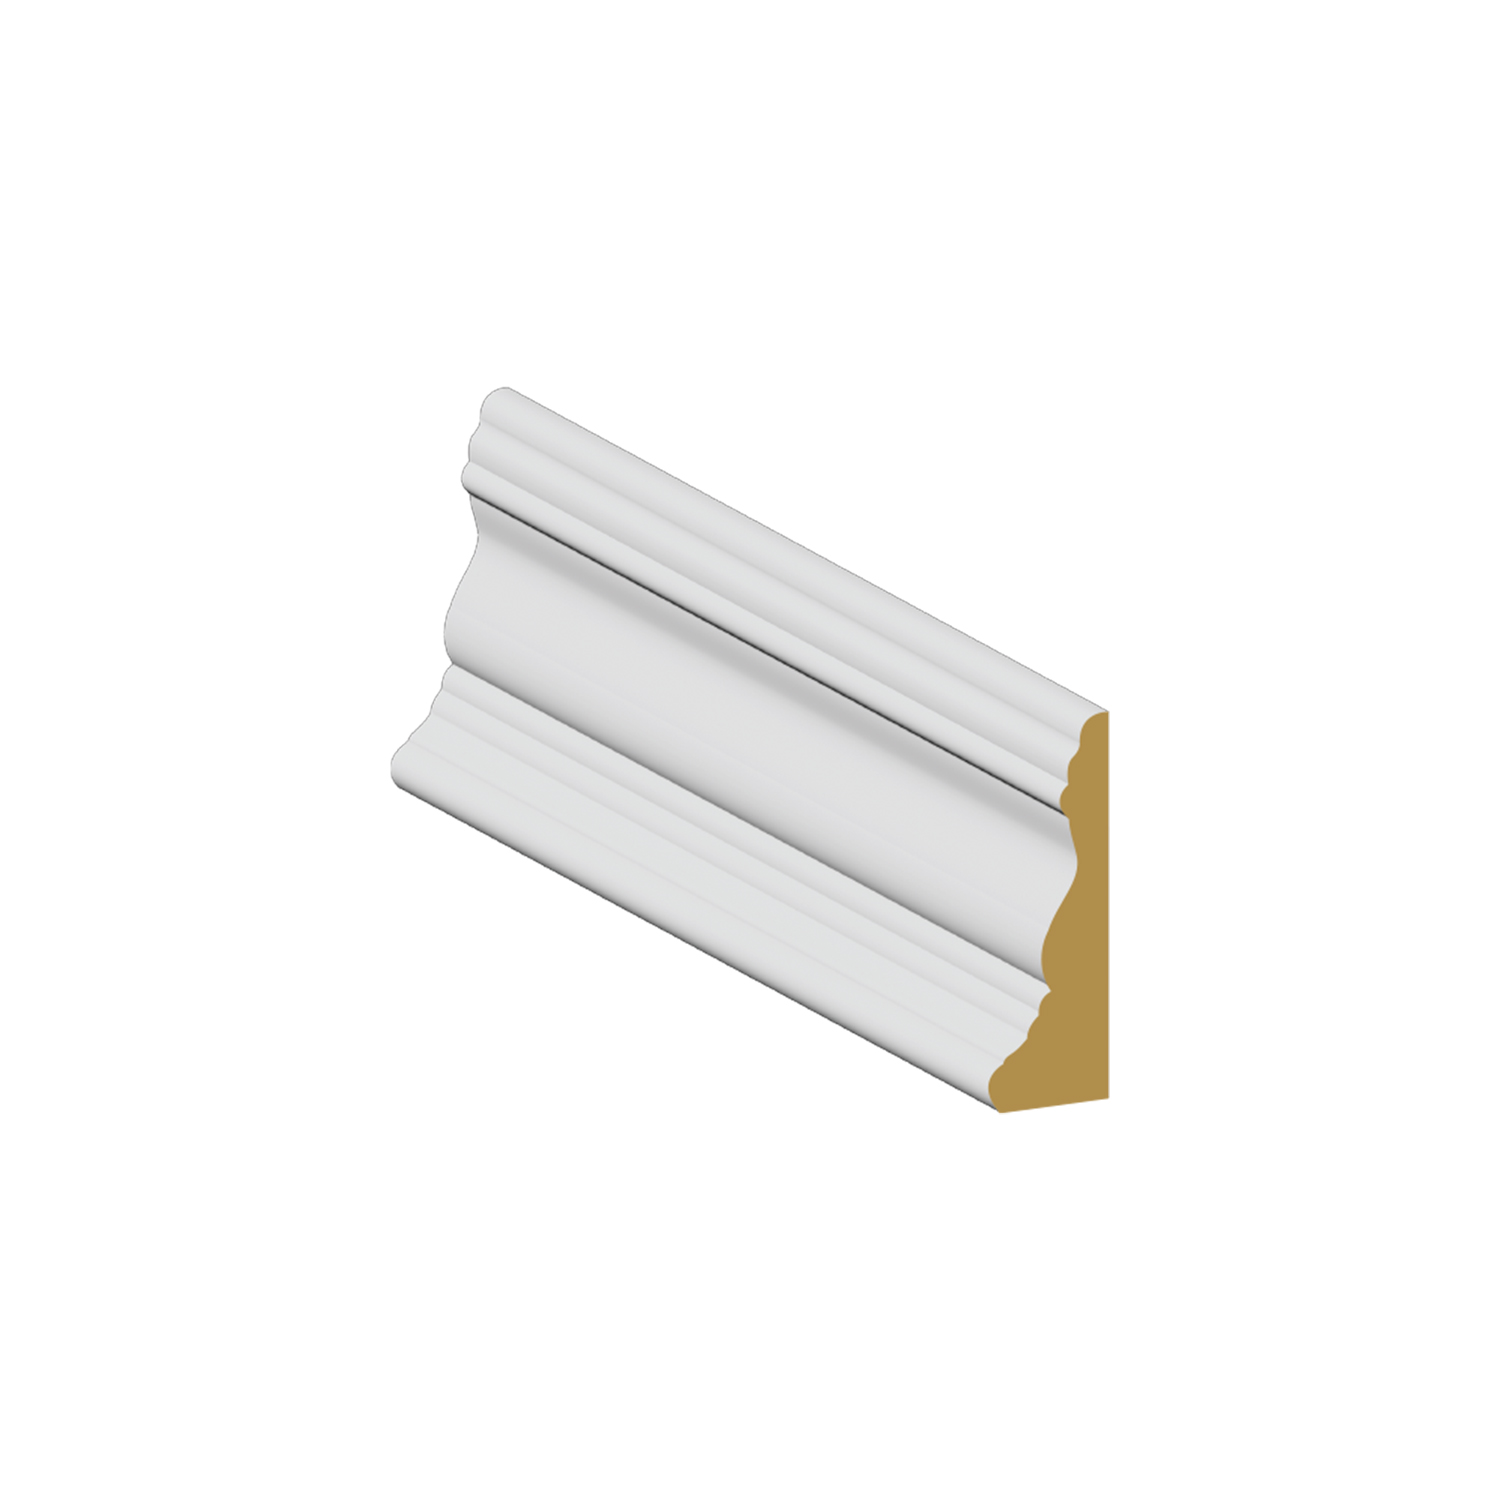 Casing MDF Colonial Back Band 3 x 1 x 86 - $1.21LF - Sold Per Piece